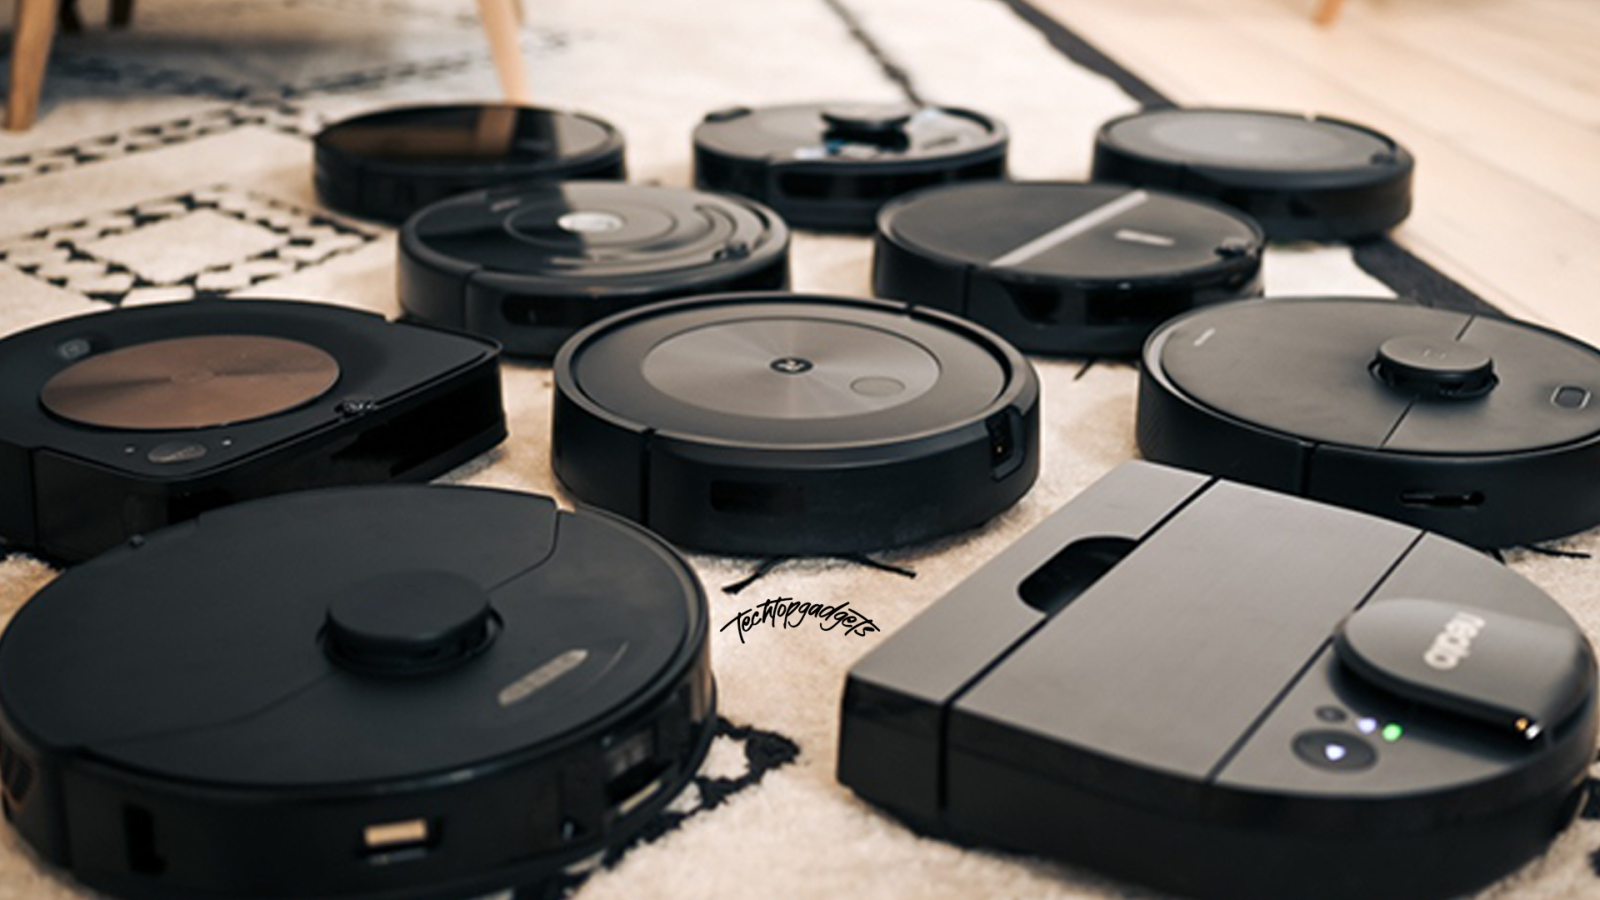 A collection of various robot vacuums on a carpet, showcasing different models and brands, each competing for the title of the best robot vacuum, reflecting the latest in home cleaning technology.